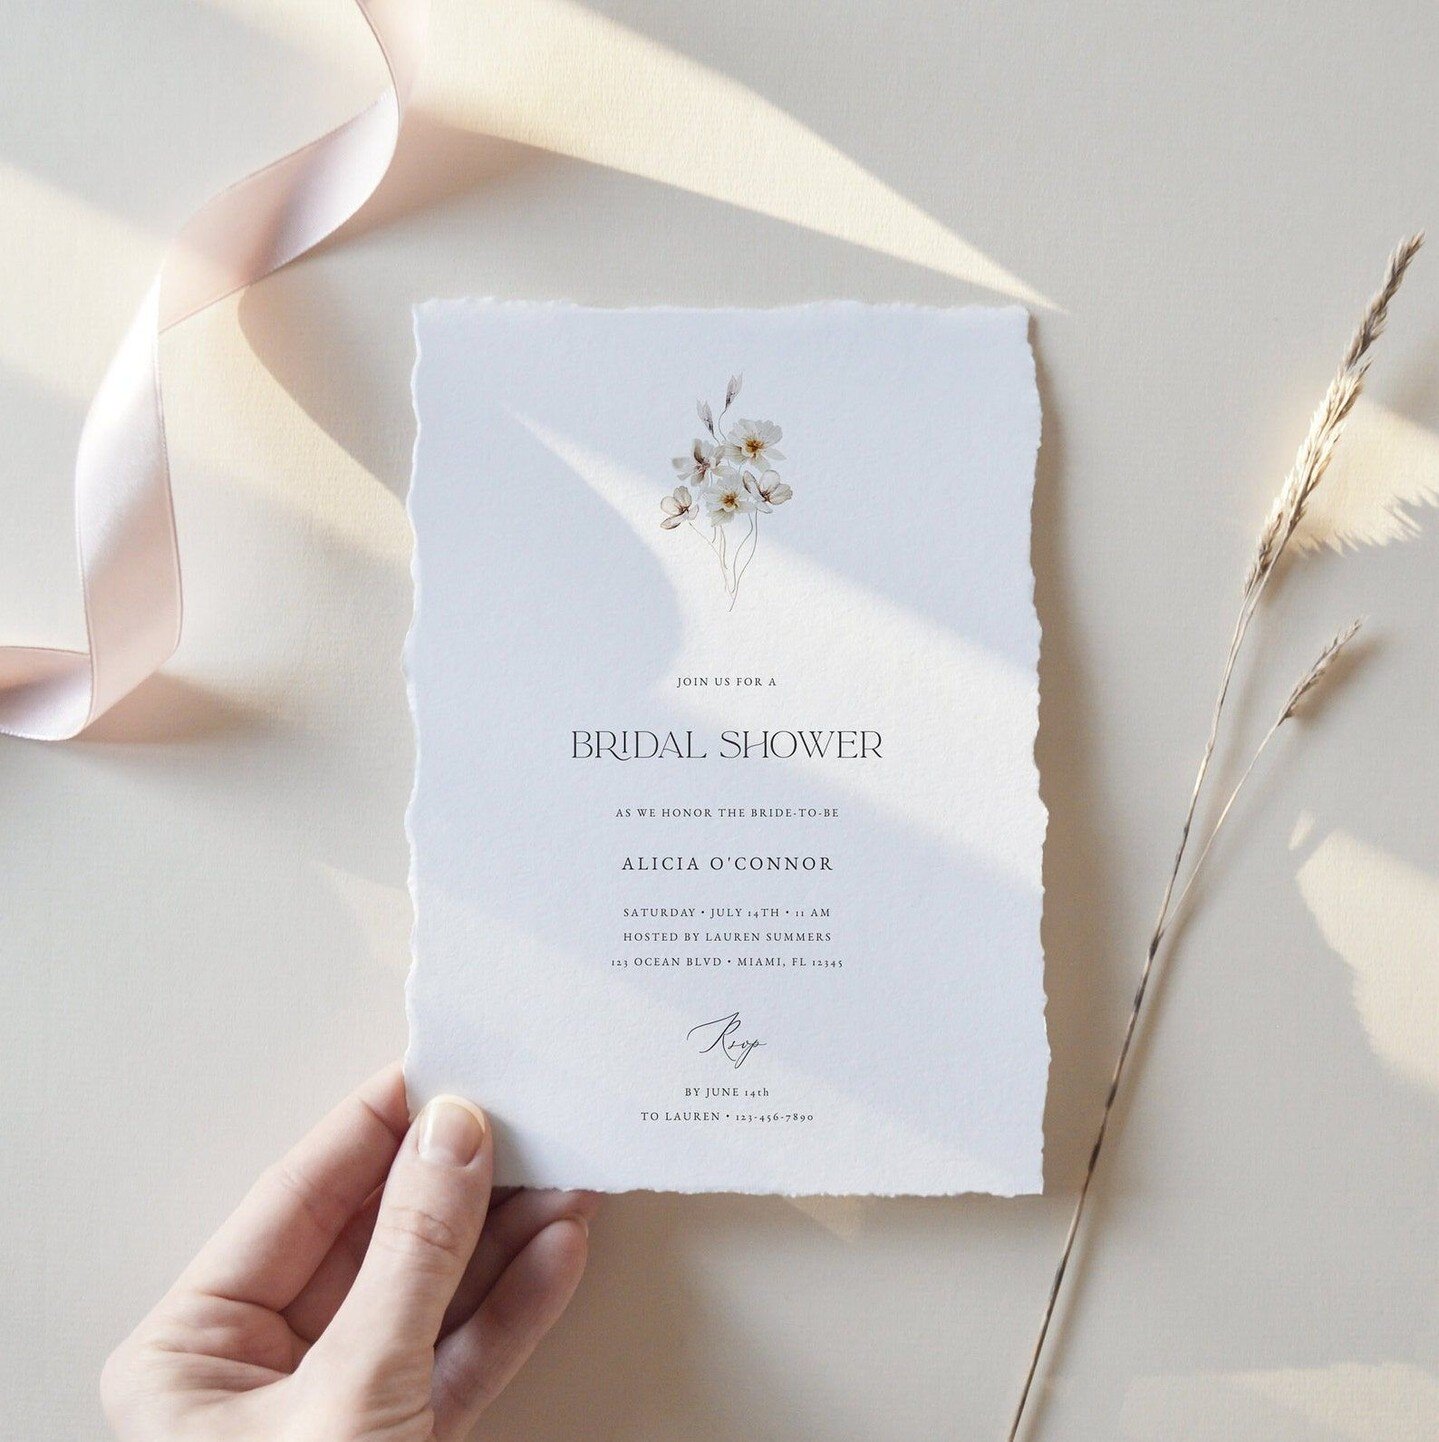 🤍⁣
&bull; editable wedding templates⁣
&bull; instant download⁣
&bull; print at home or print shop⁠⁣
⁣
This template is editable directly in your web browser! No need to download any software or fonts.⁣
〰⁣
Head to my Blanche Paperie Etsy shop (link i